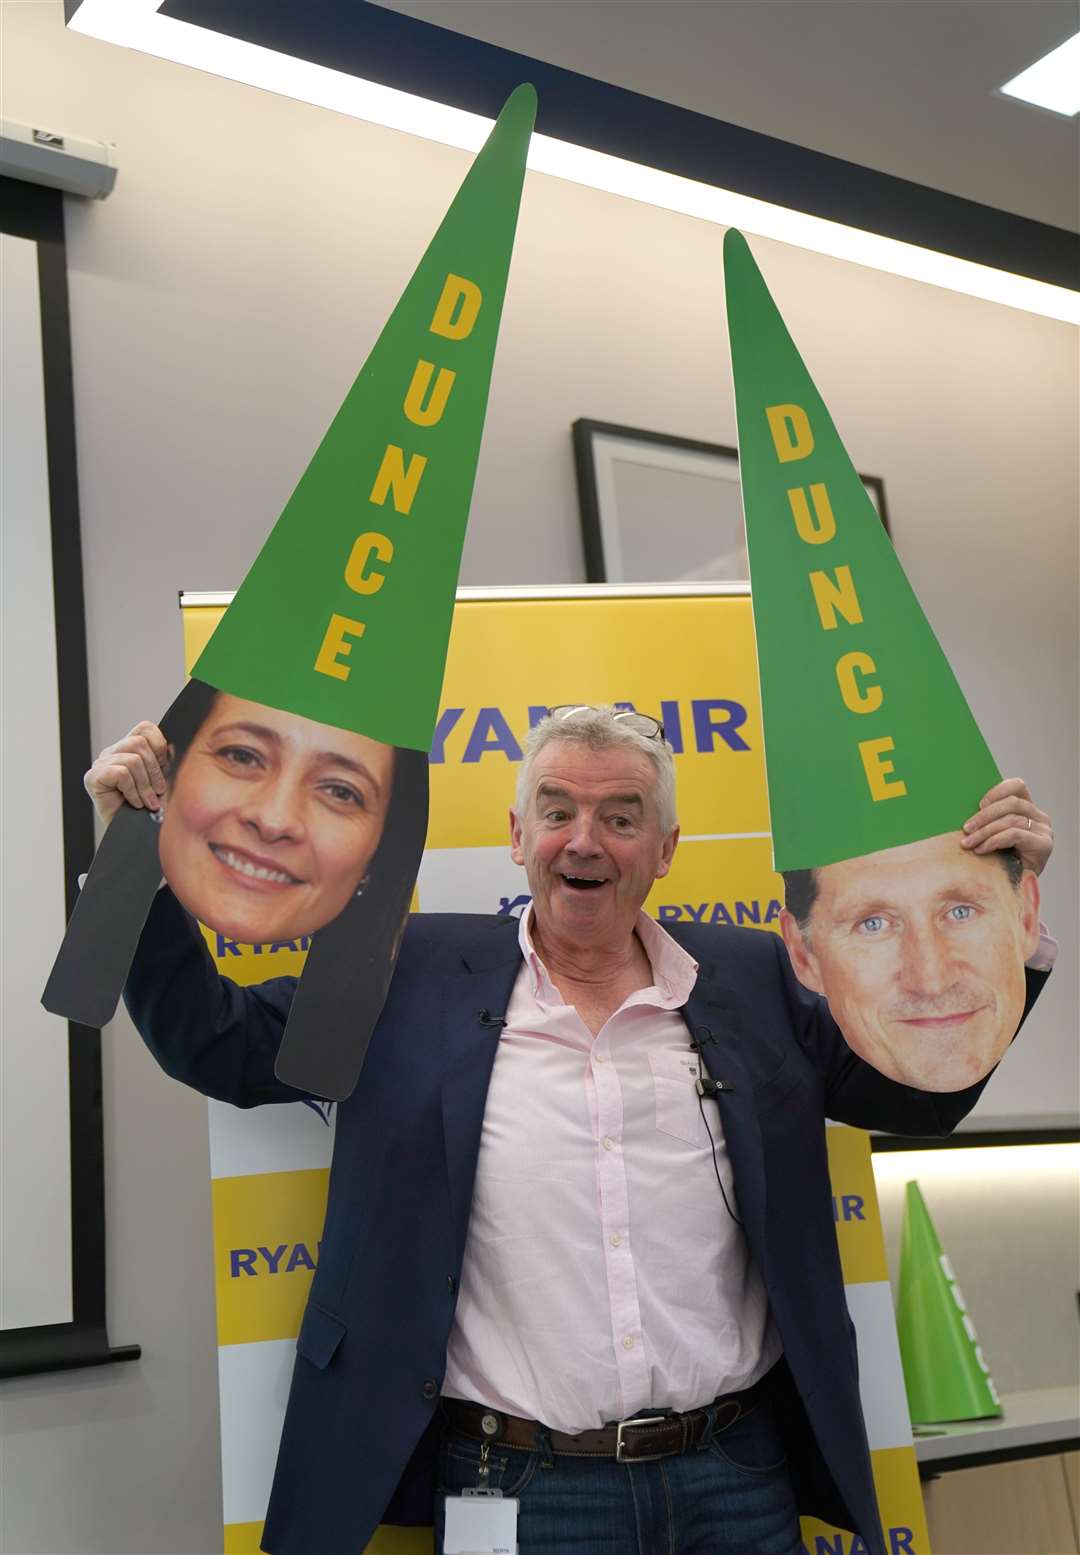 Ryanair chief executive Michael O’Leary described himself as a ‘loudmouth’ (Brian Lawless/PA)